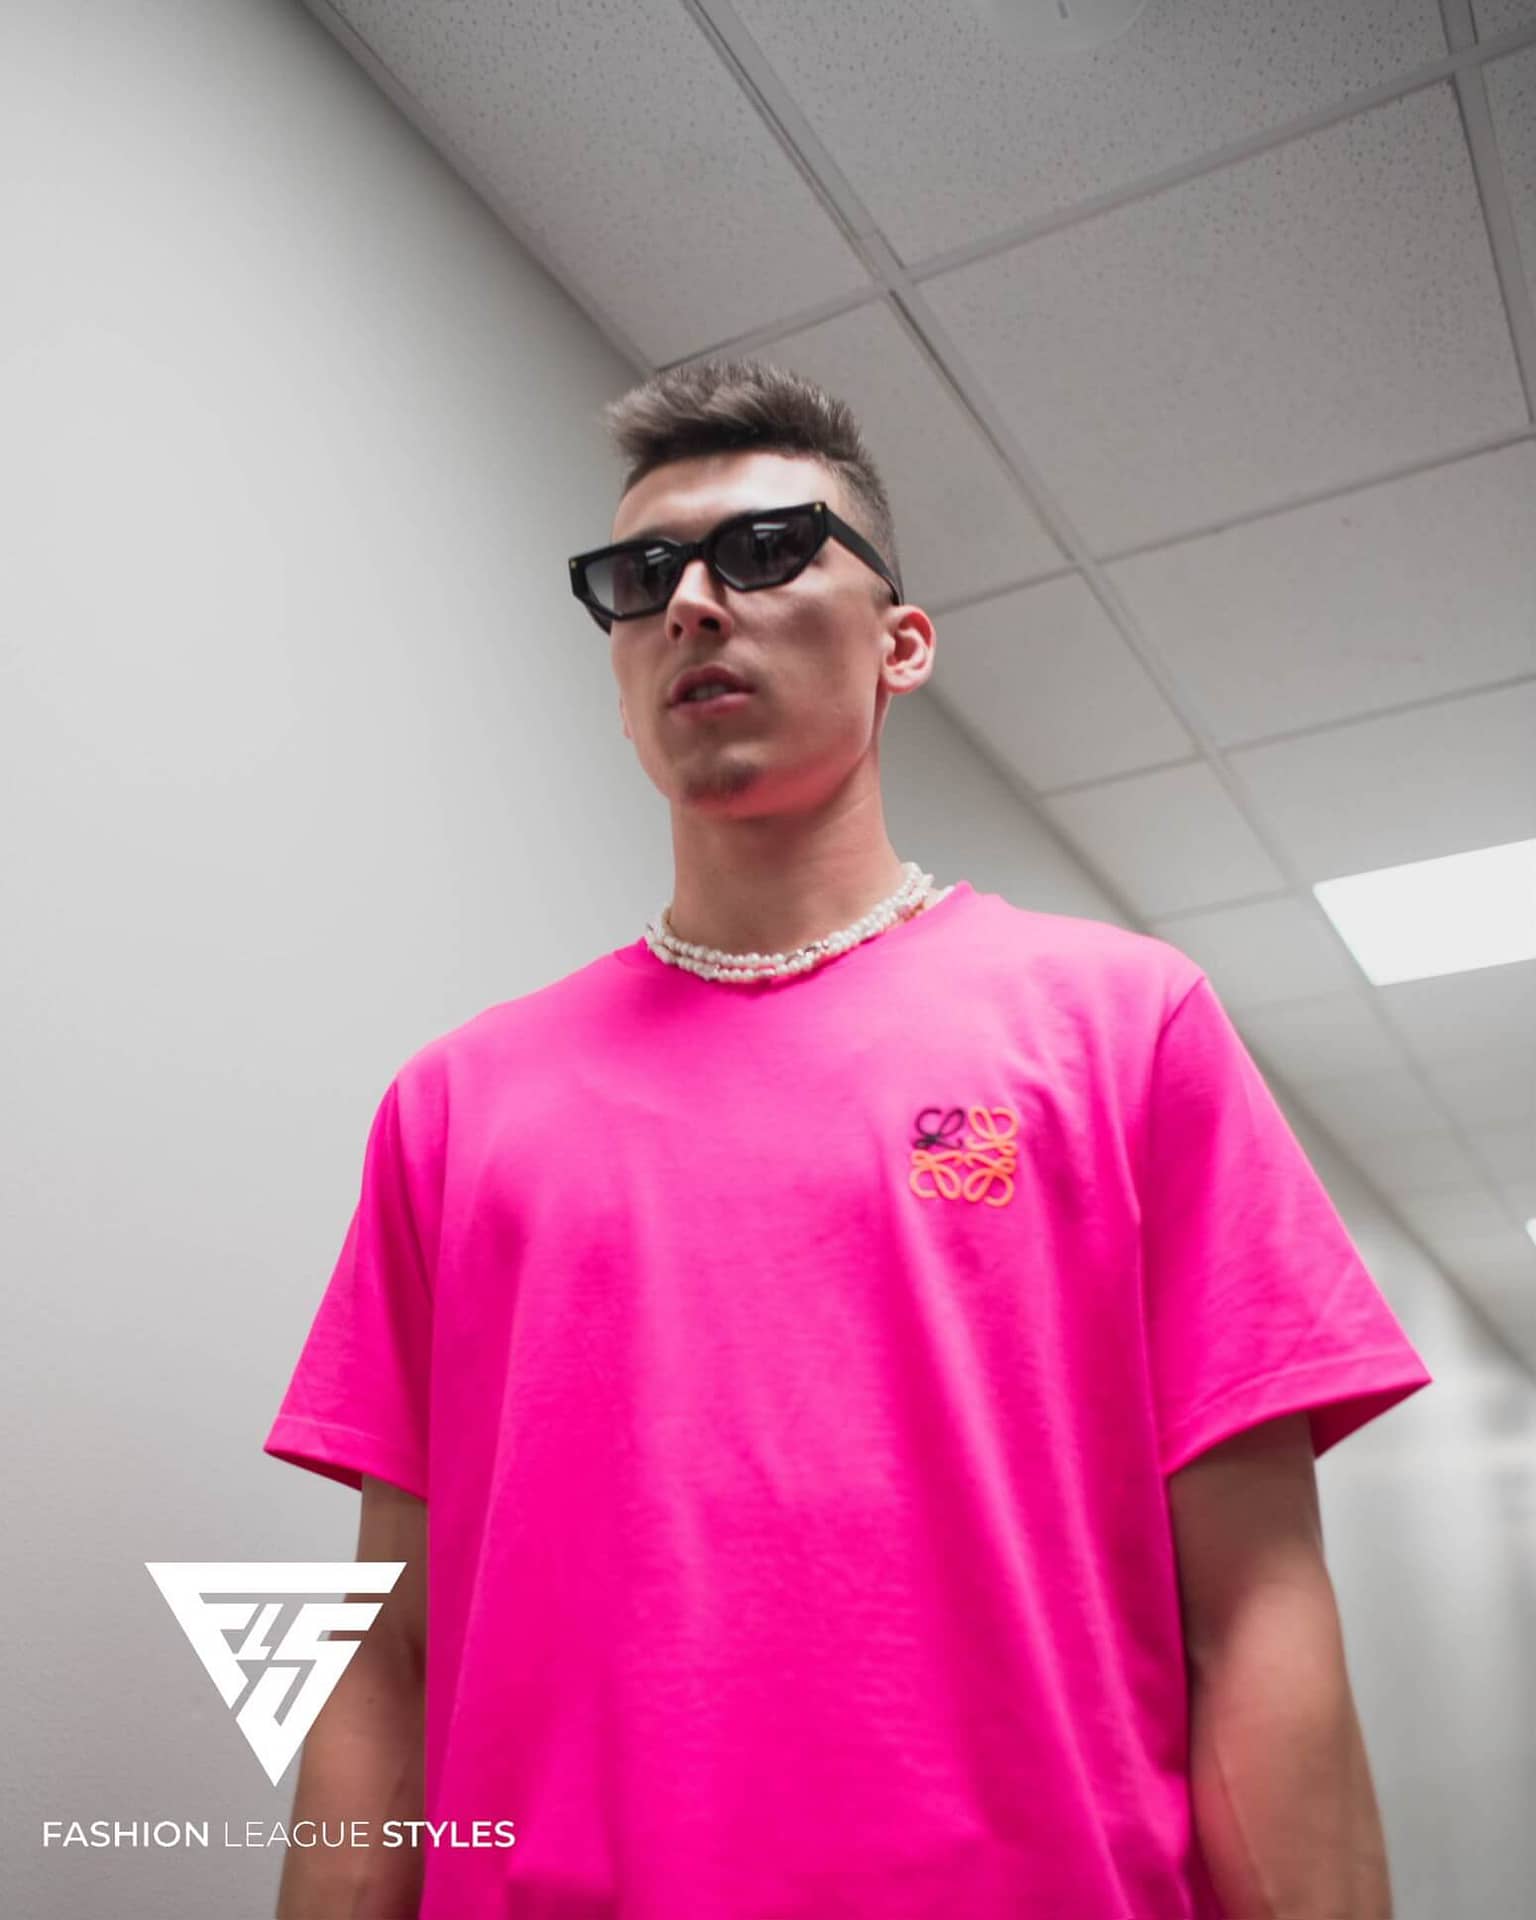 Tapped In” with Tyler Herro - Fashion League Styles